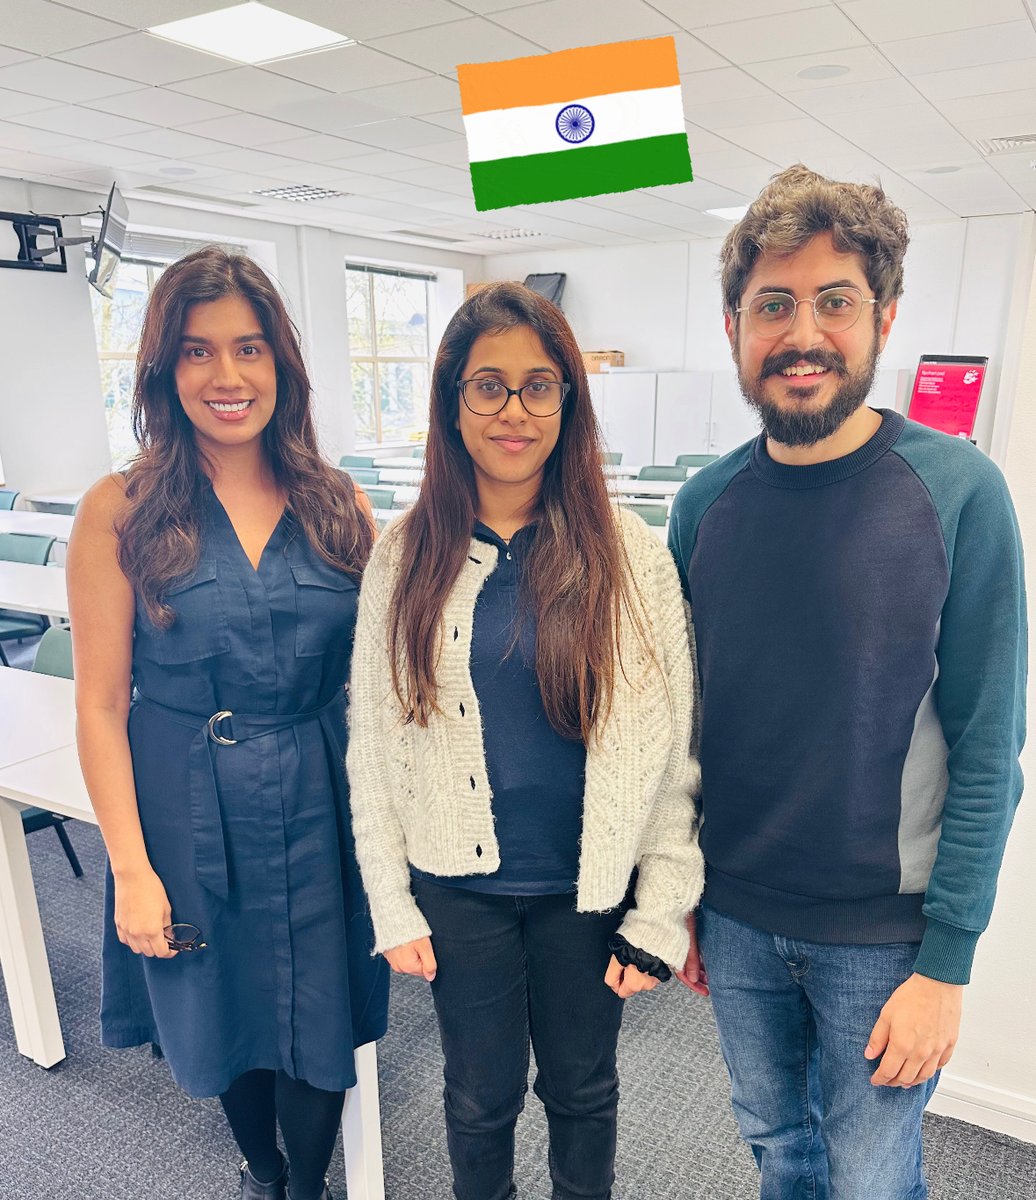 🇮🇳 Great to see Dr Karan back in the Academy recently! Mocks, chats and final preps… we know he’ll do great on his PLAB 2 exam 🙂 👉 Arora UKMLA PLAB 2 Academy+ package: aroramedicaleducation.co.uk/plab-2-academy/ #CanPassWillPass